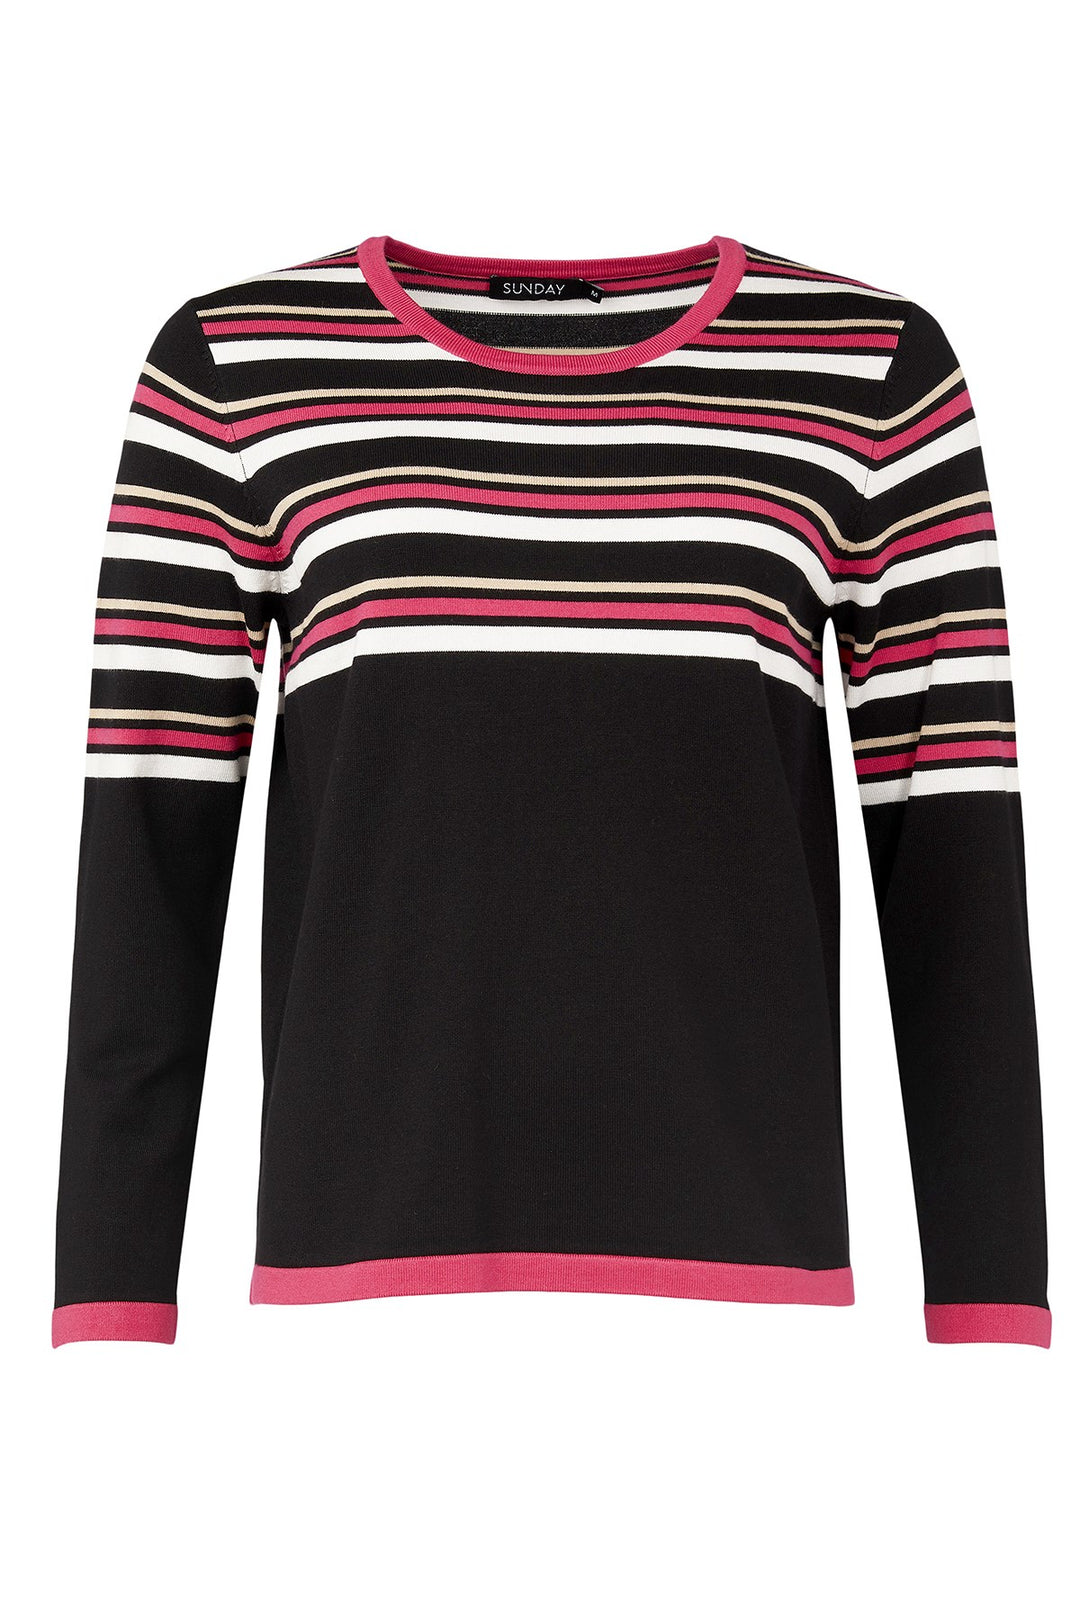 Sunday Pullover Pink Black and White 6576 Col 55 Front | Dotique